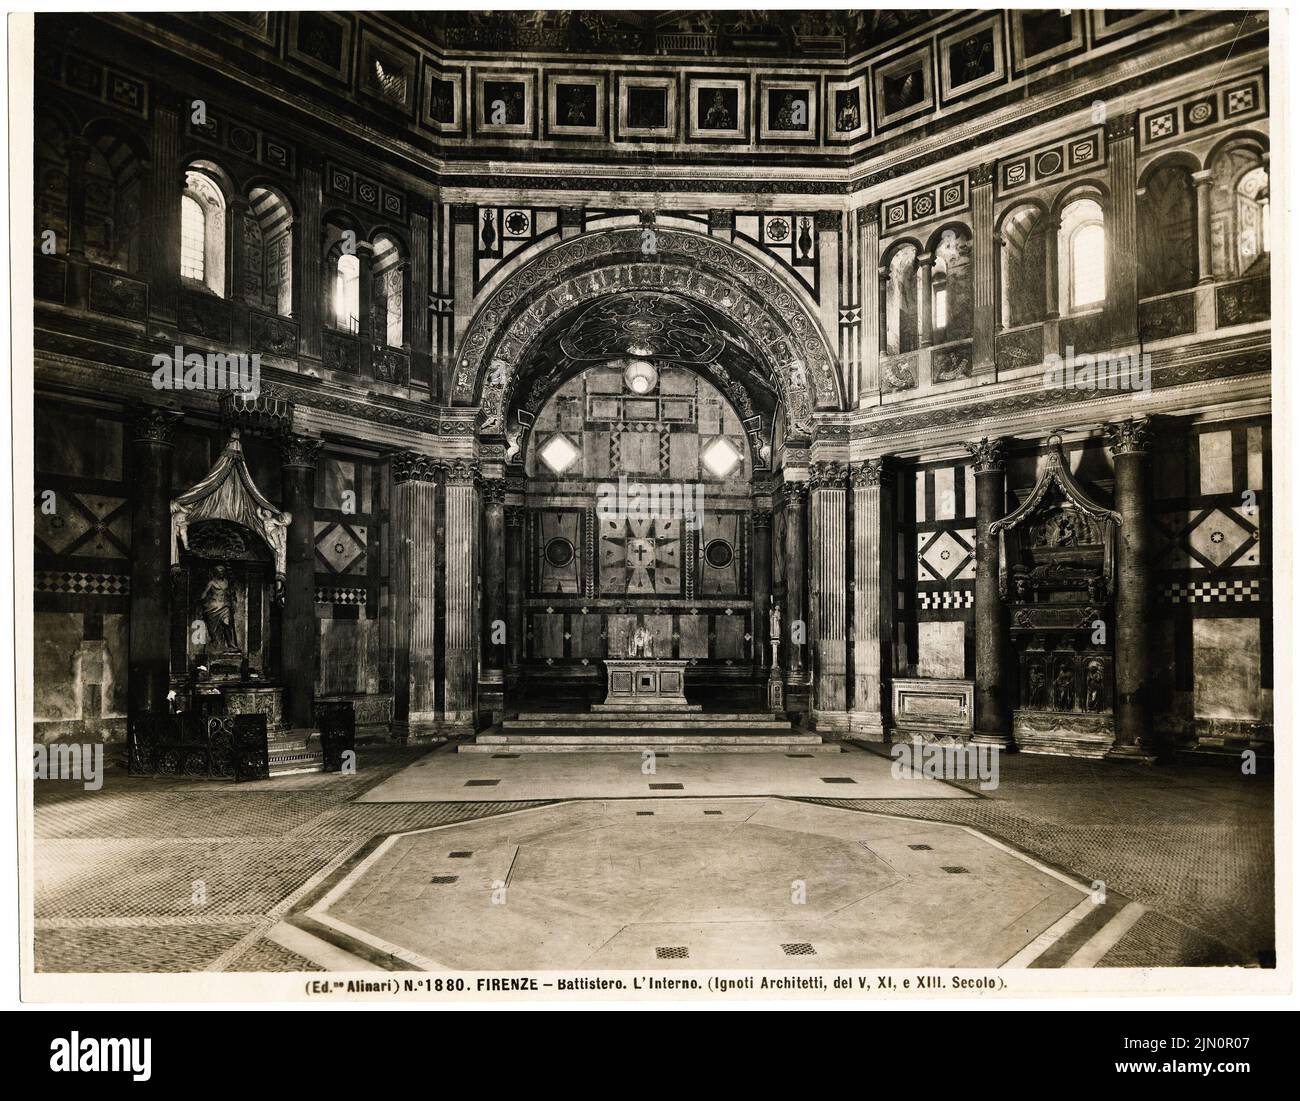 Cambio Arnolfo Di (1240-1302), Baptistery, Florence (without Dat.): Interior view. Photo, 20.3 x 26.1 cm (including scan edges) Cambio Arnolfo di (1240-1302): Baptisterium, Florenz (ohne Dat.) Stock Photo